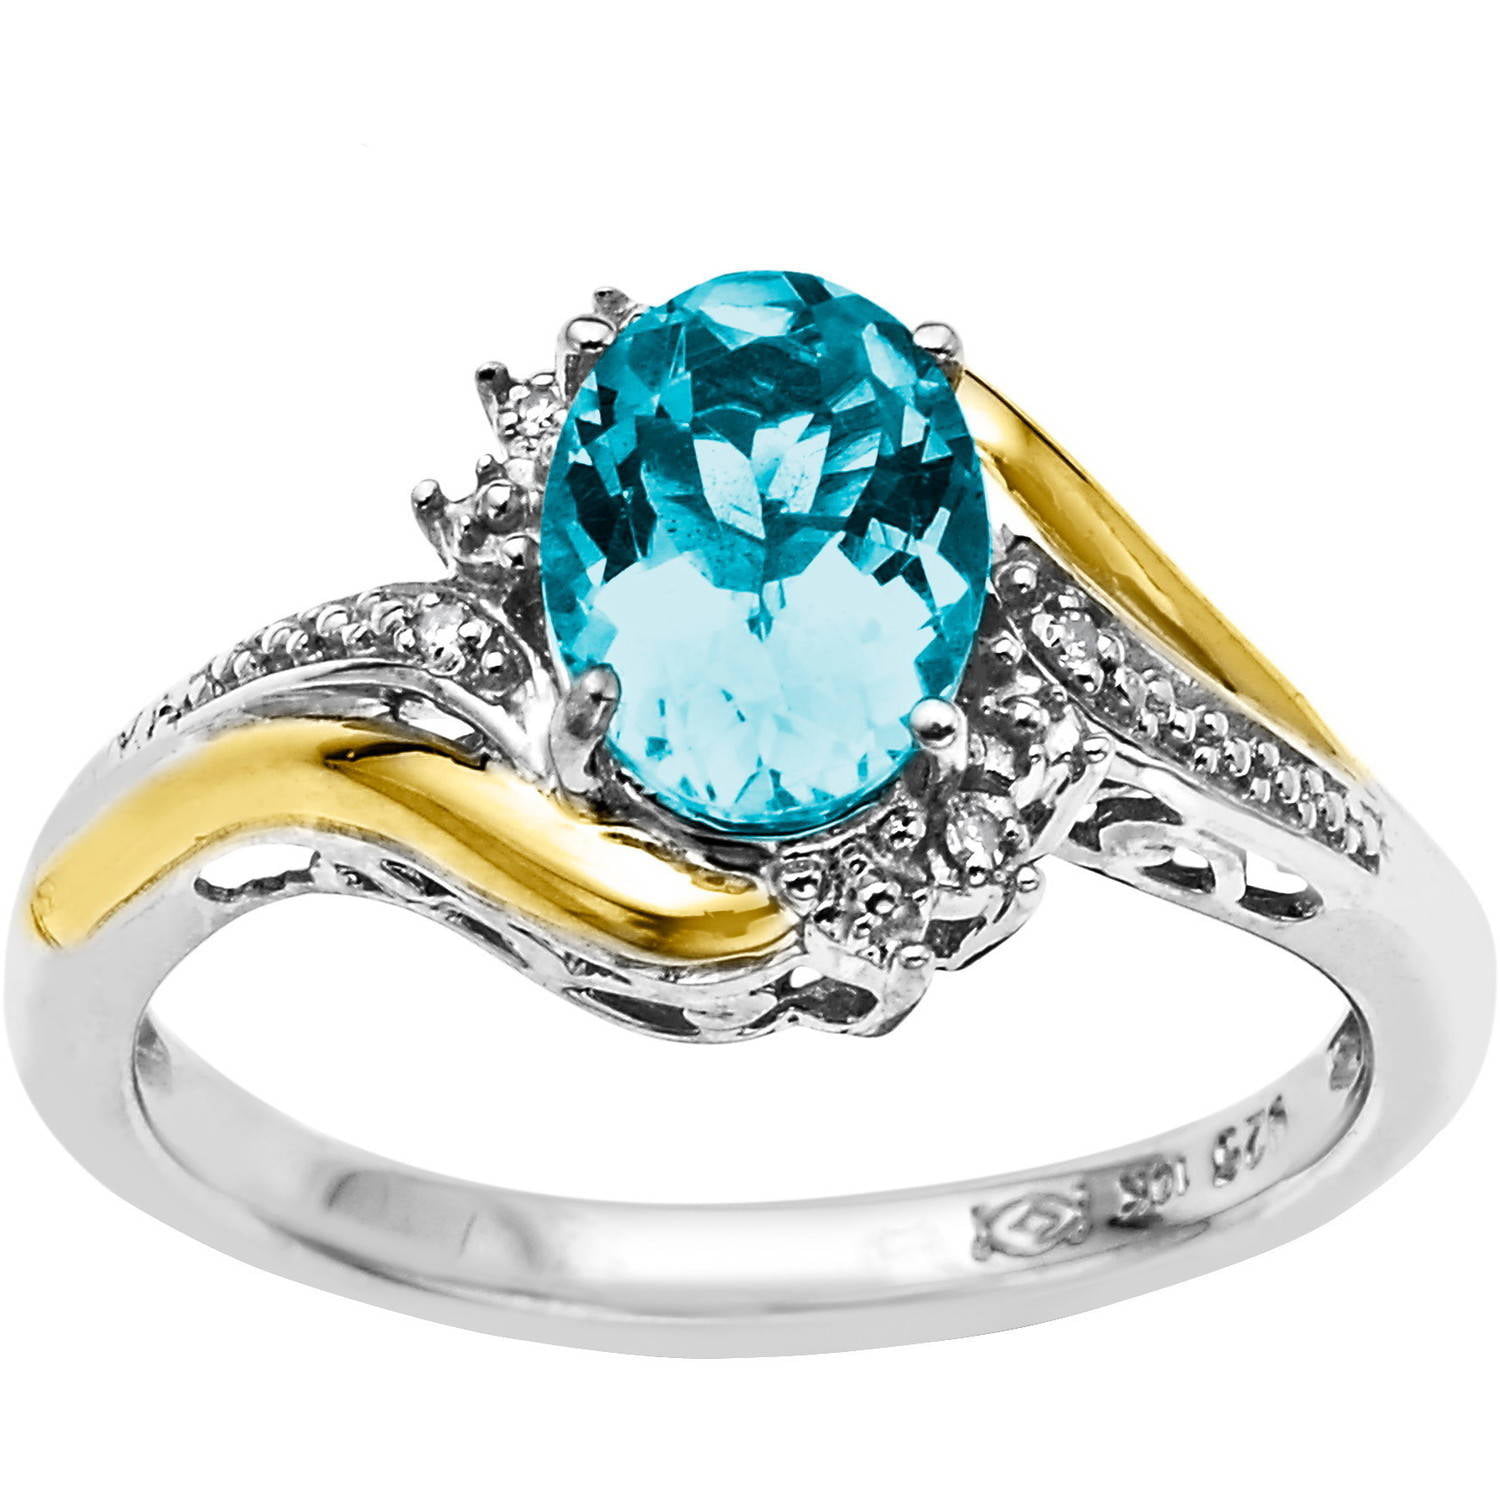 Jewelryonclick Natural Blue Topaz Sterling Silver Cluster Engagement Ring Birthstone Jewelry Size 5 To 13 